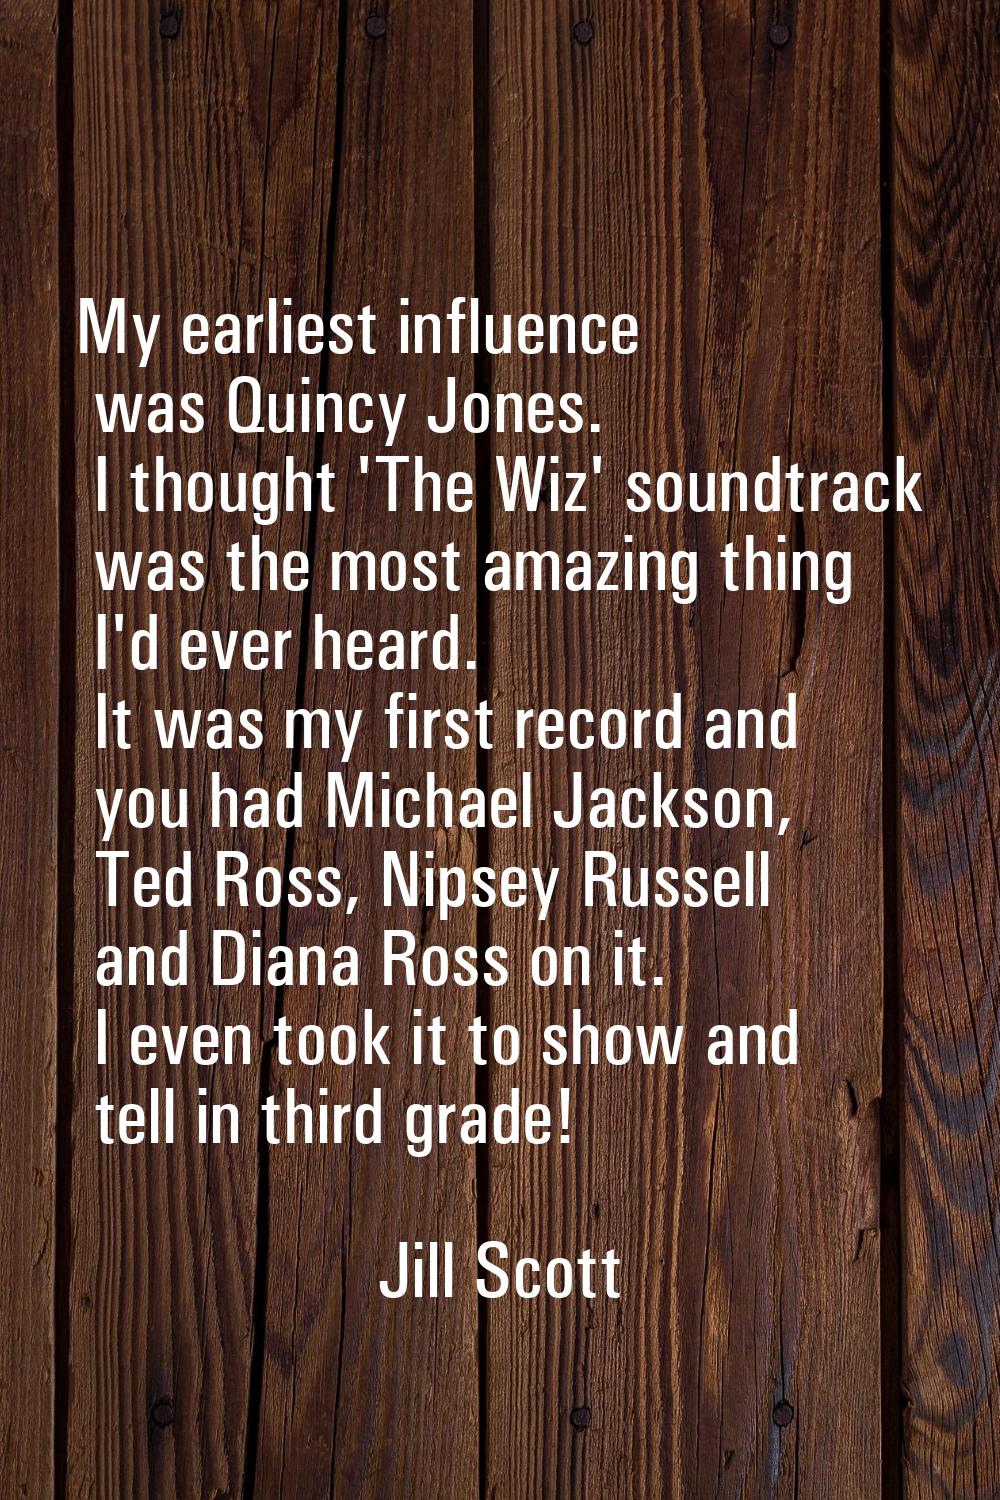 My earliest influence was Quincy Jones. I thought 'The Wiz' soundtrack was the most amazing thing I